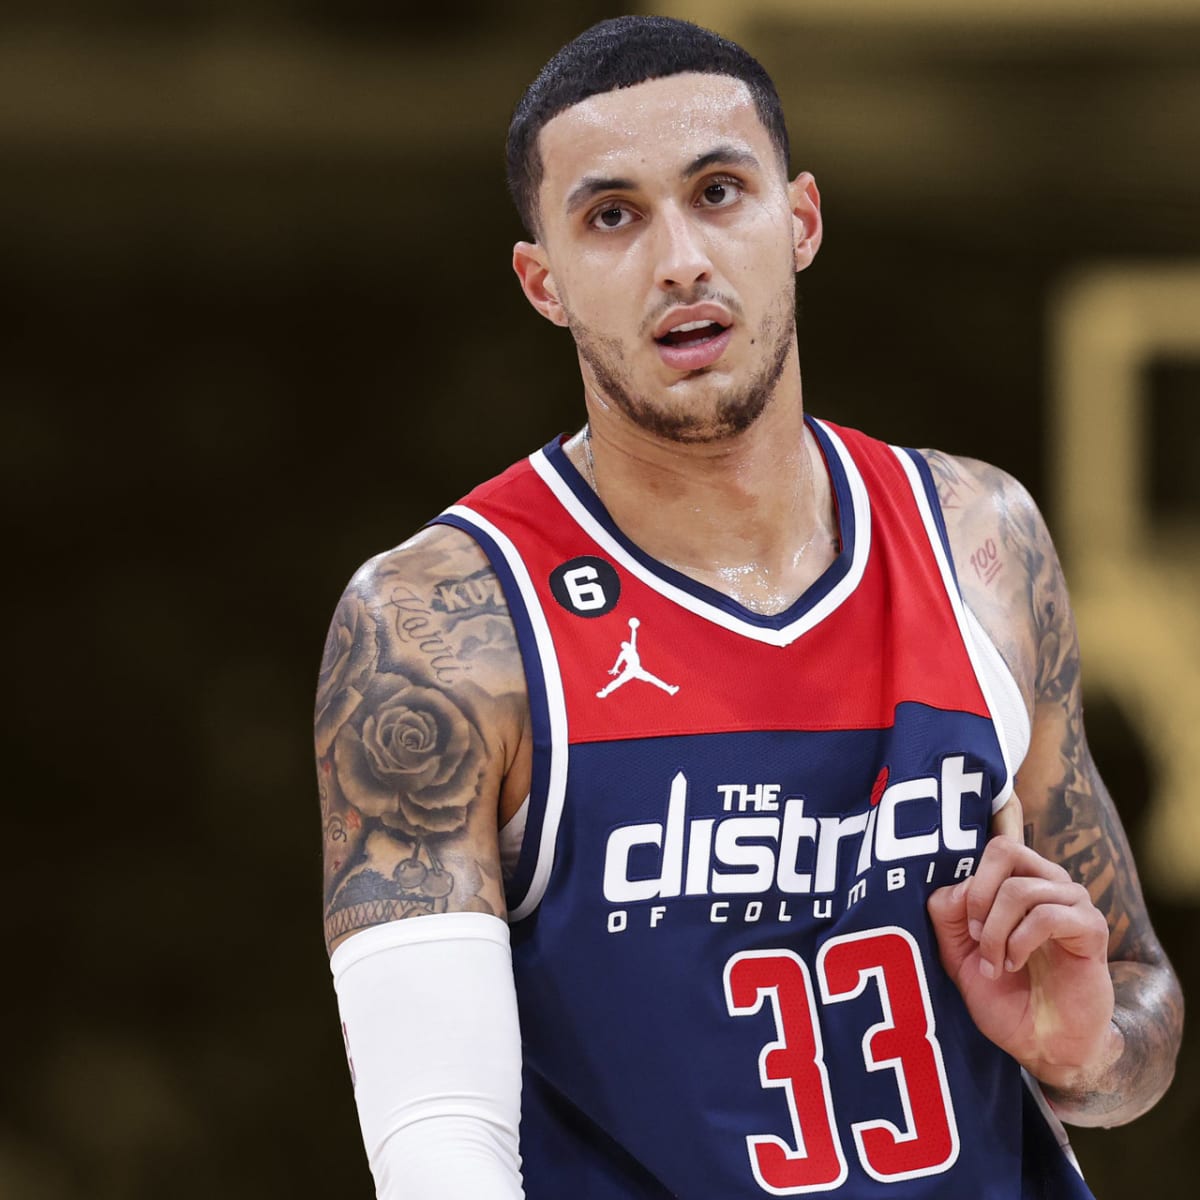 Kyle Kuzma intends on declining his player options, and the